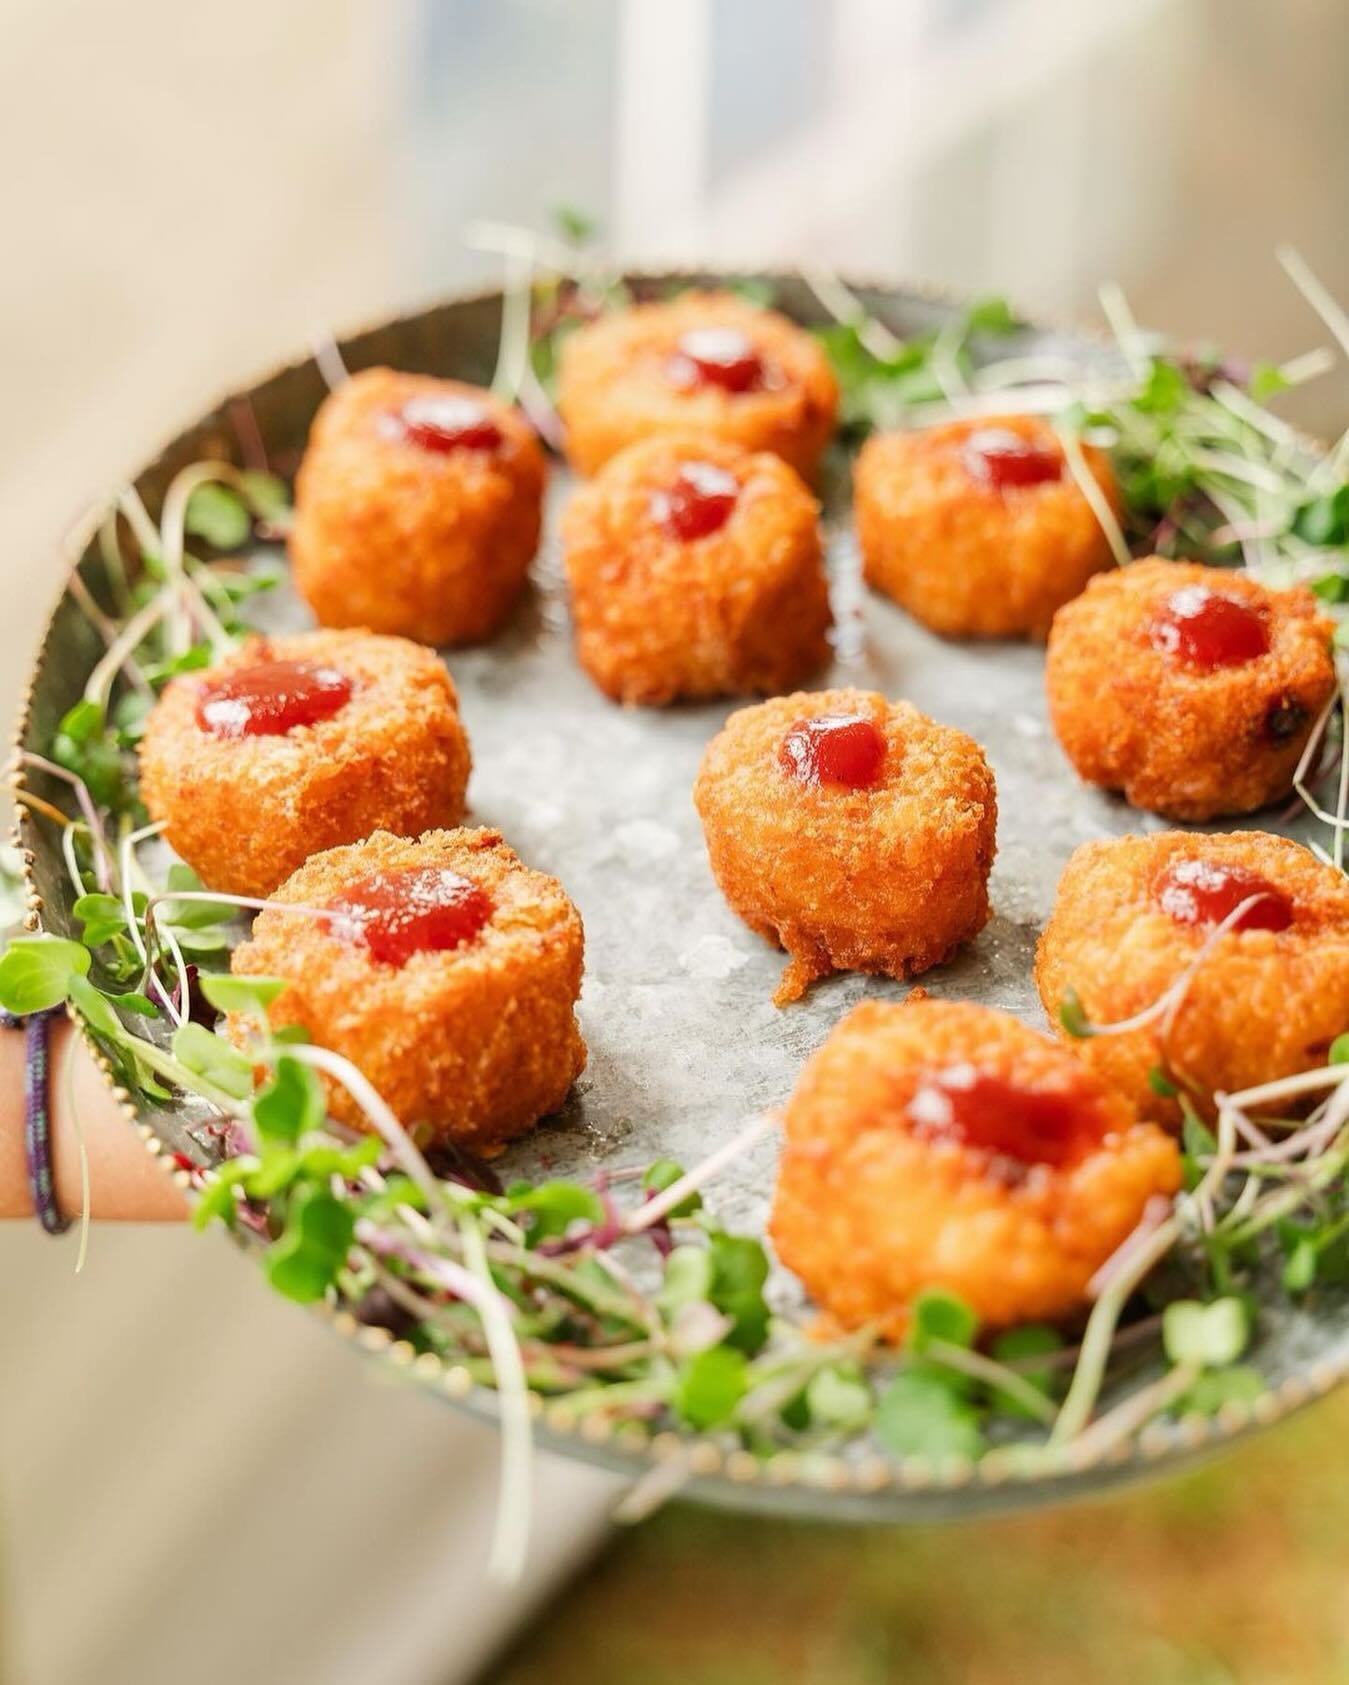 We loved being a part of the 2023 Dinner in the Gap! 
Here we are as a part of the appetizer course in the shape of Pimento Cheese Arrancini from last years event.
⤵️ 
We suggest you &ldquo;Save the Date&rdquo; and &ldquo;Mark Your Calendars Now&rdqu